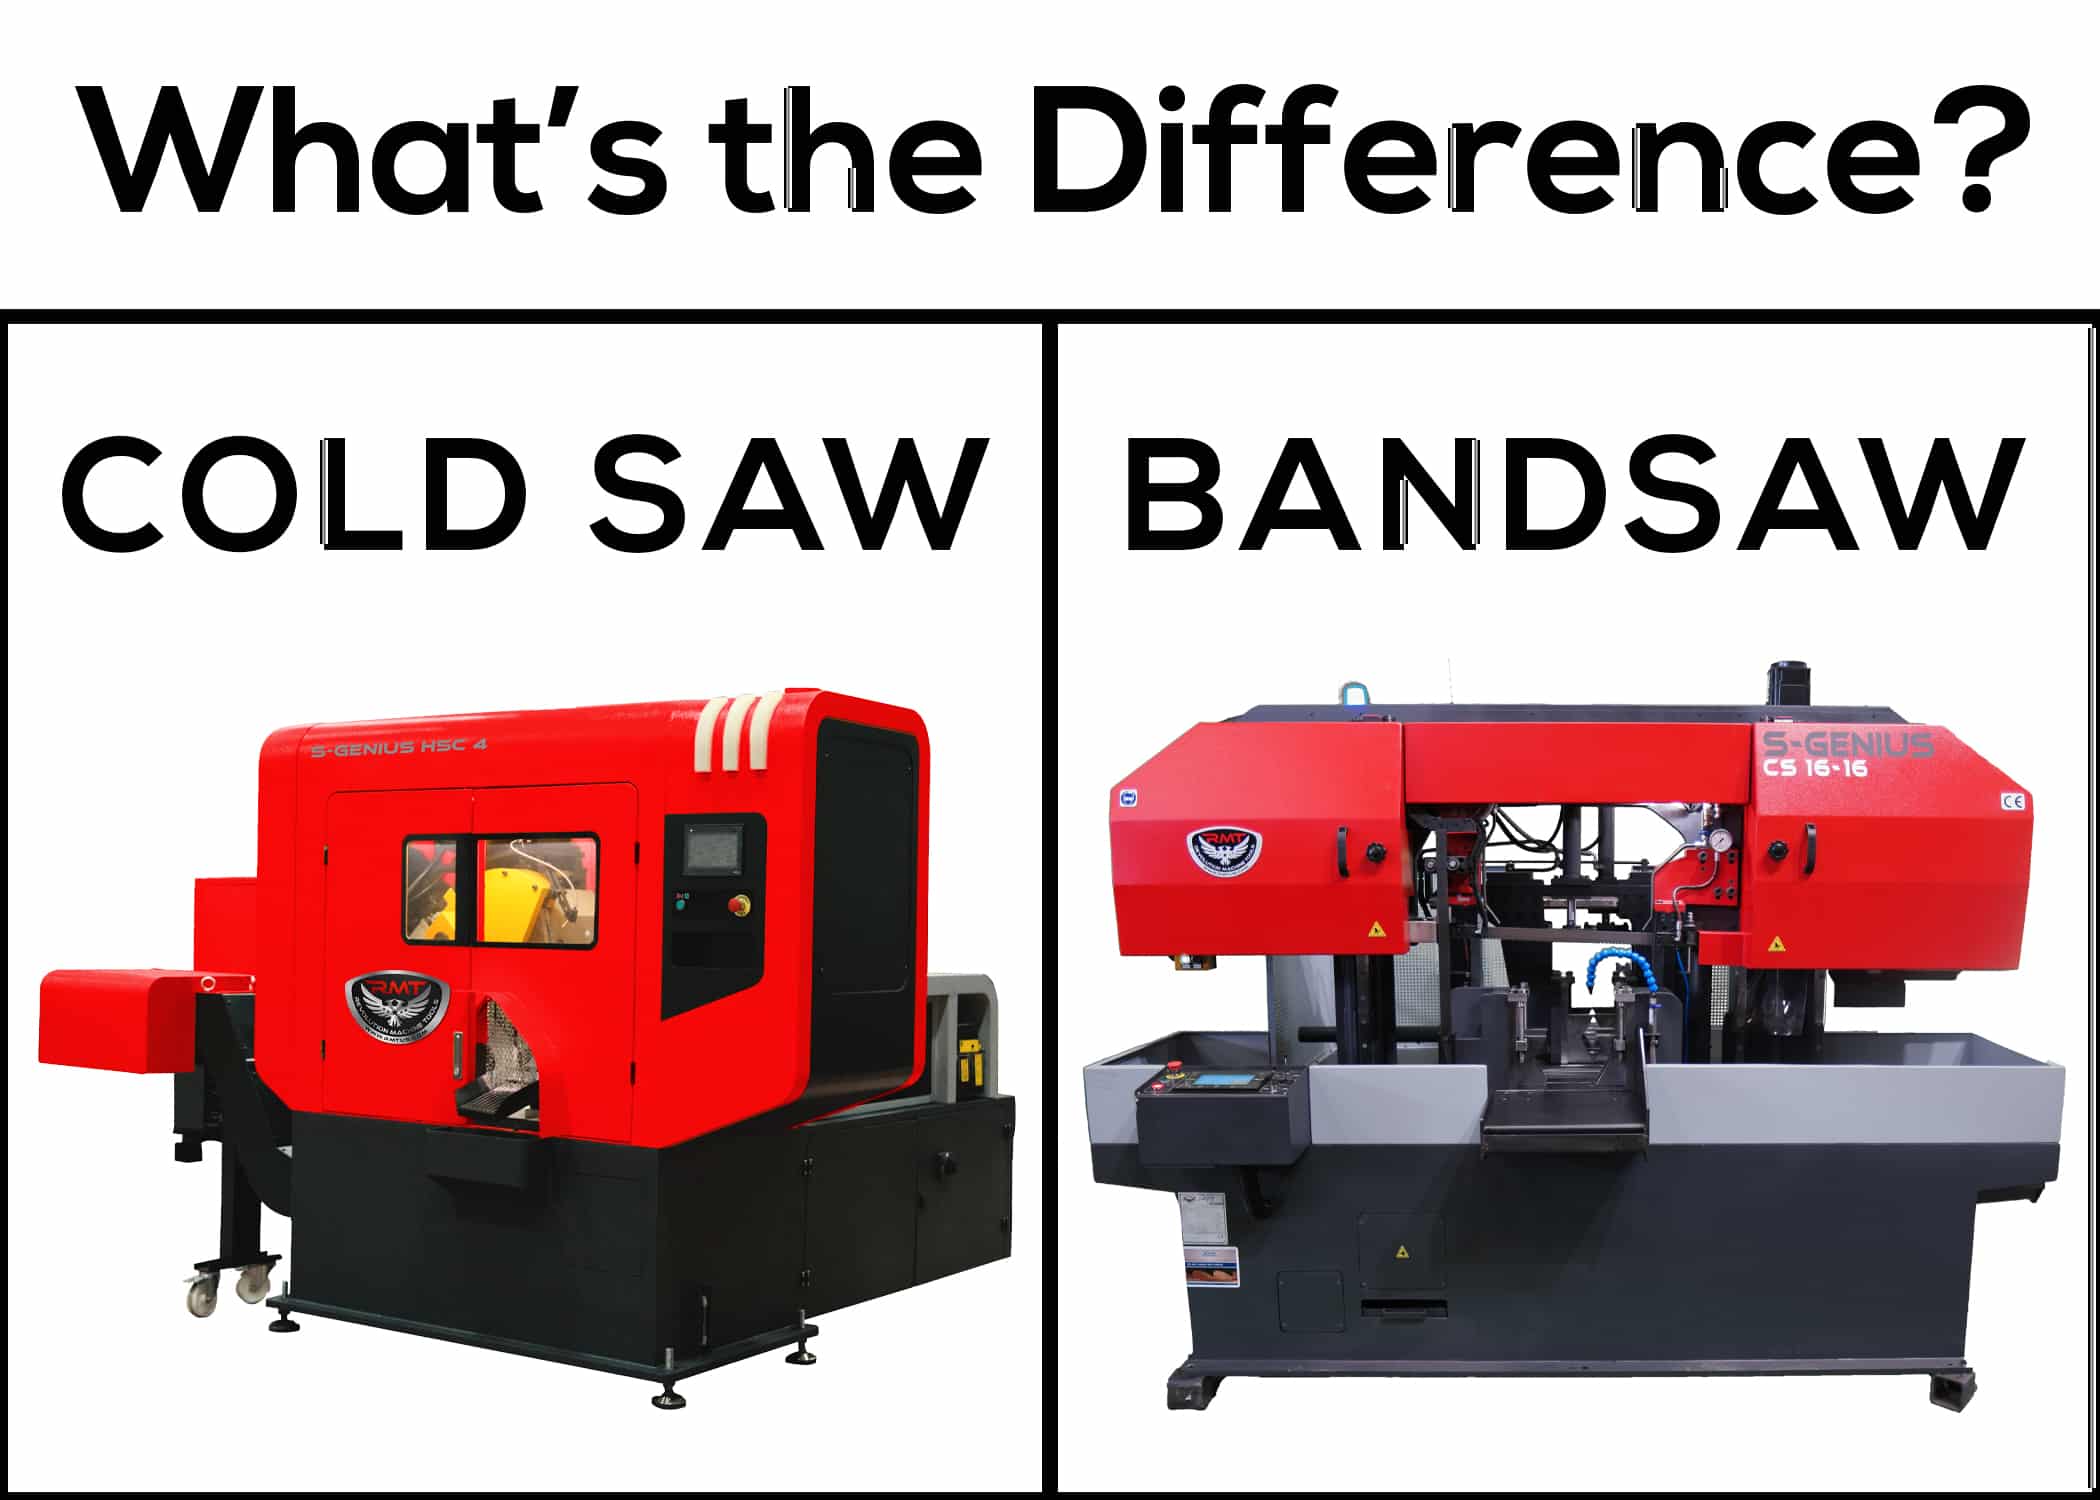 What’s the Difference Between a Cold Saw and a Bandsaw?